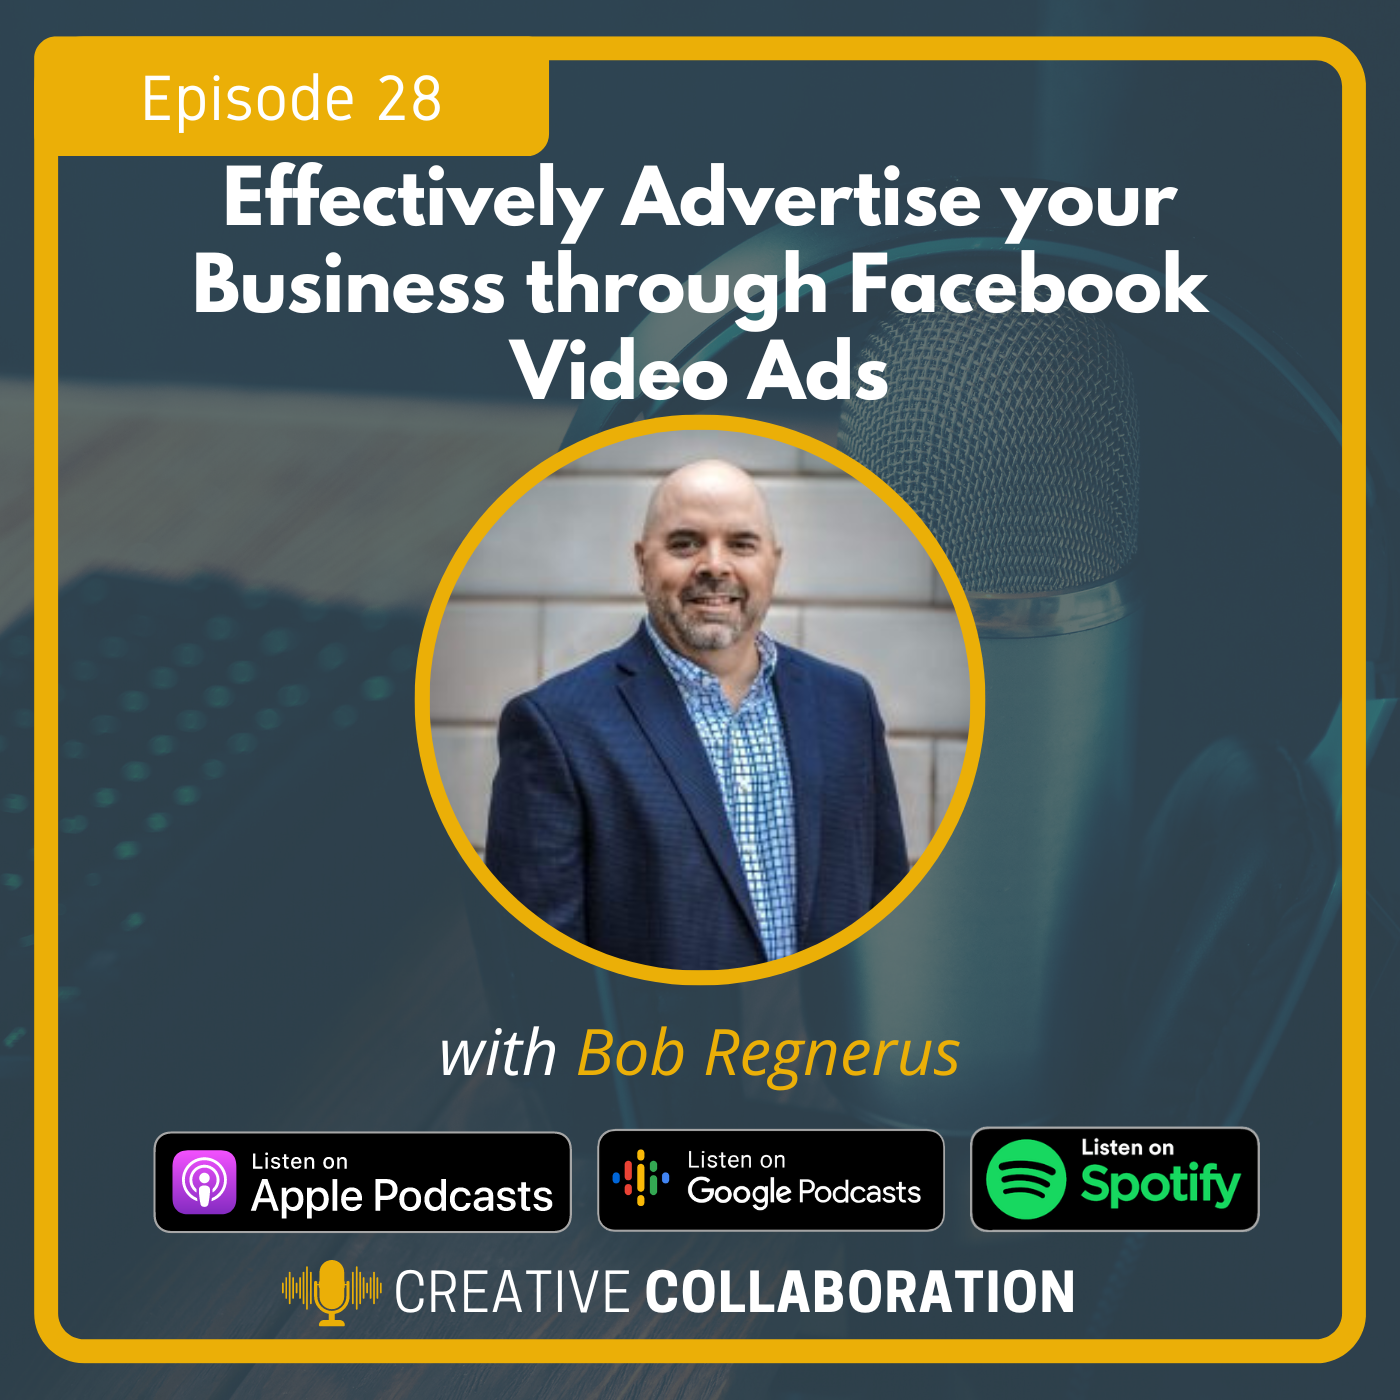 Effectively Advertise your Business through Facebook Video Ads with Bob Regnerus Image